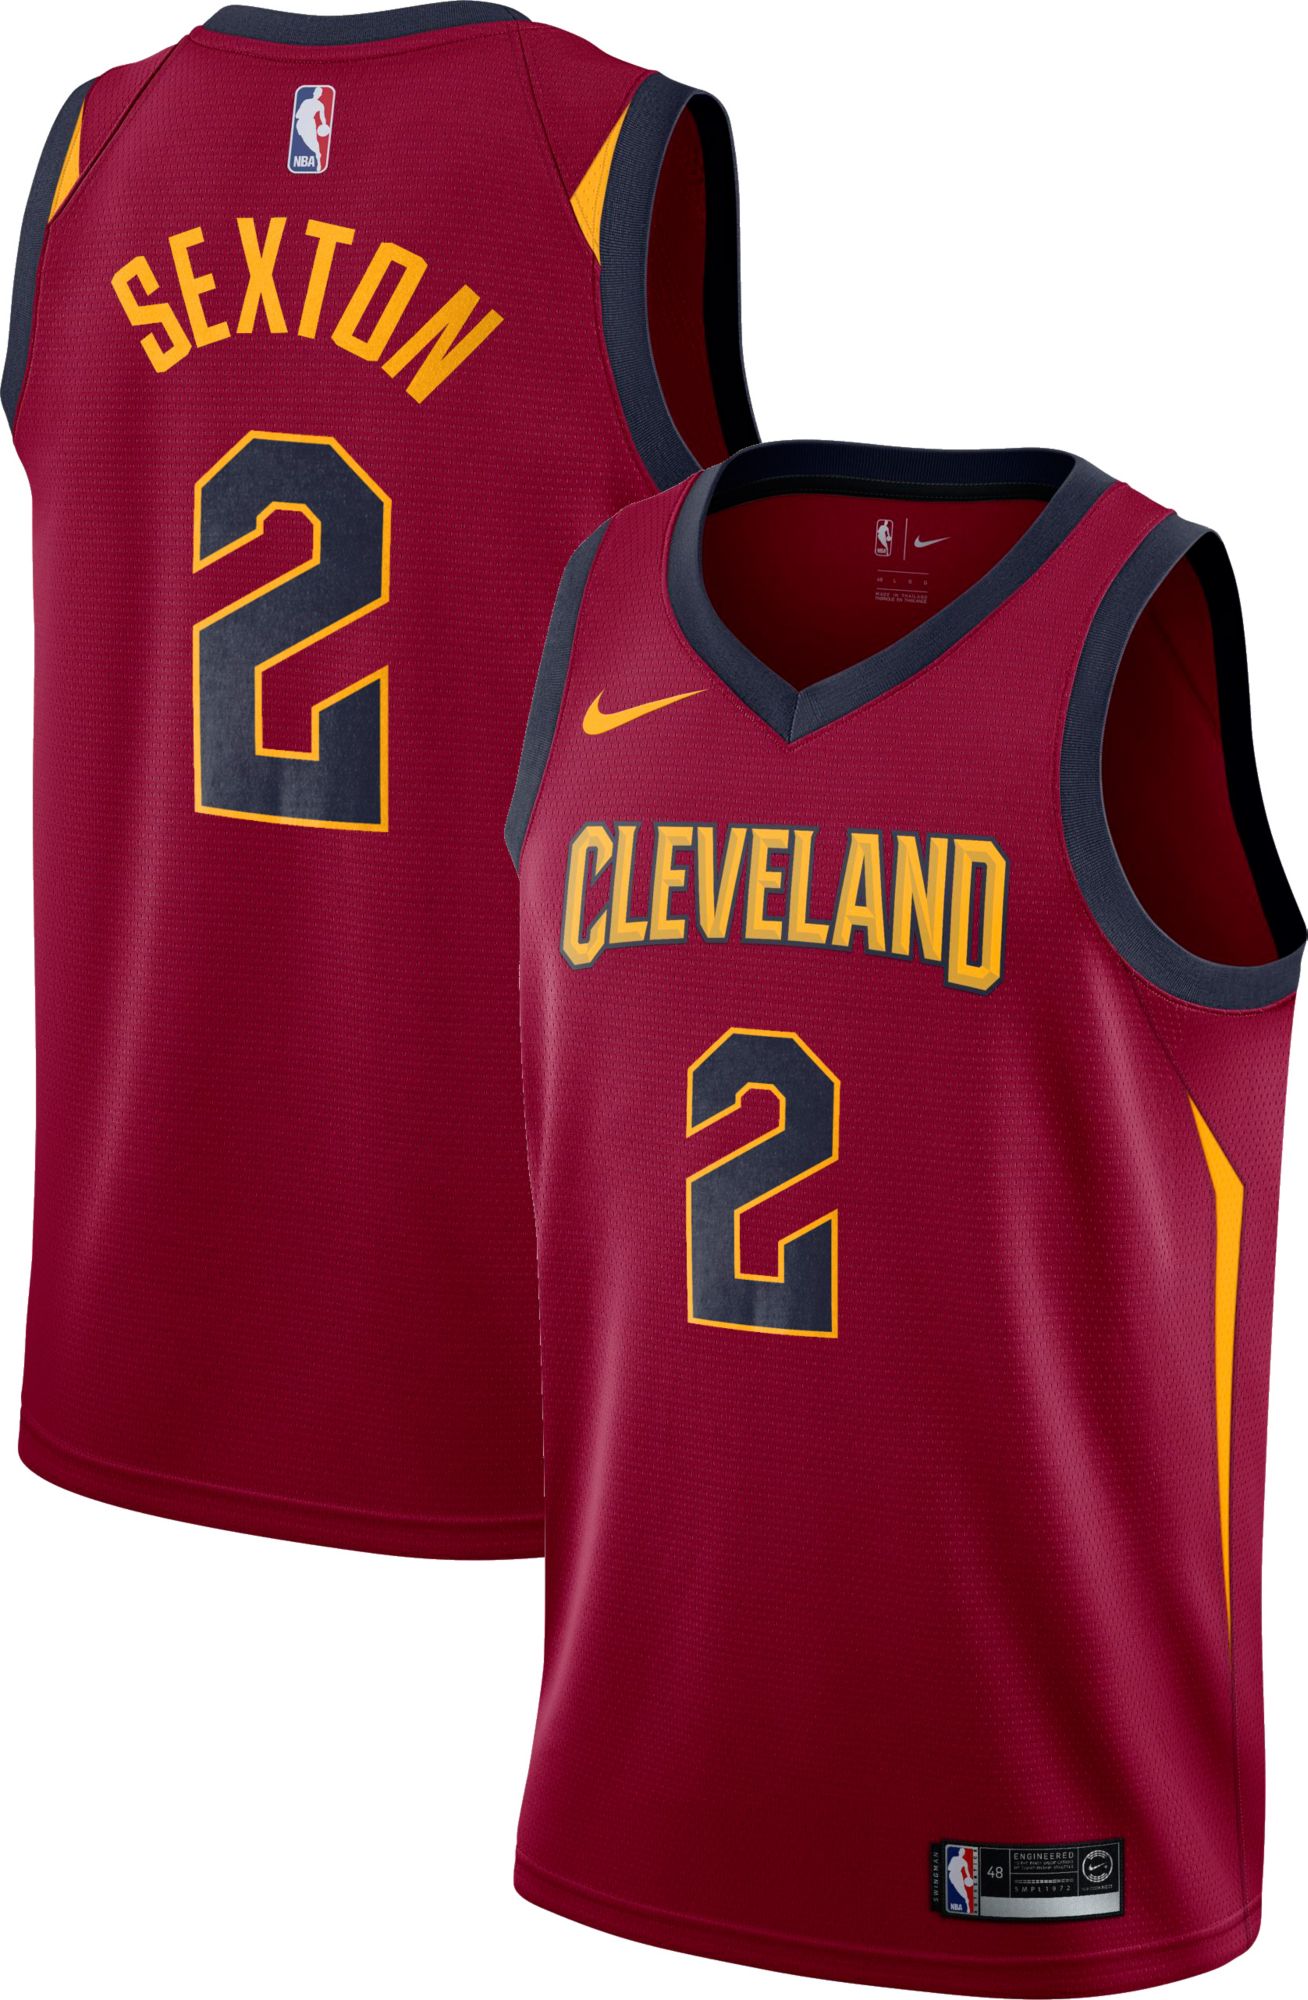 youth cavaliers jersey